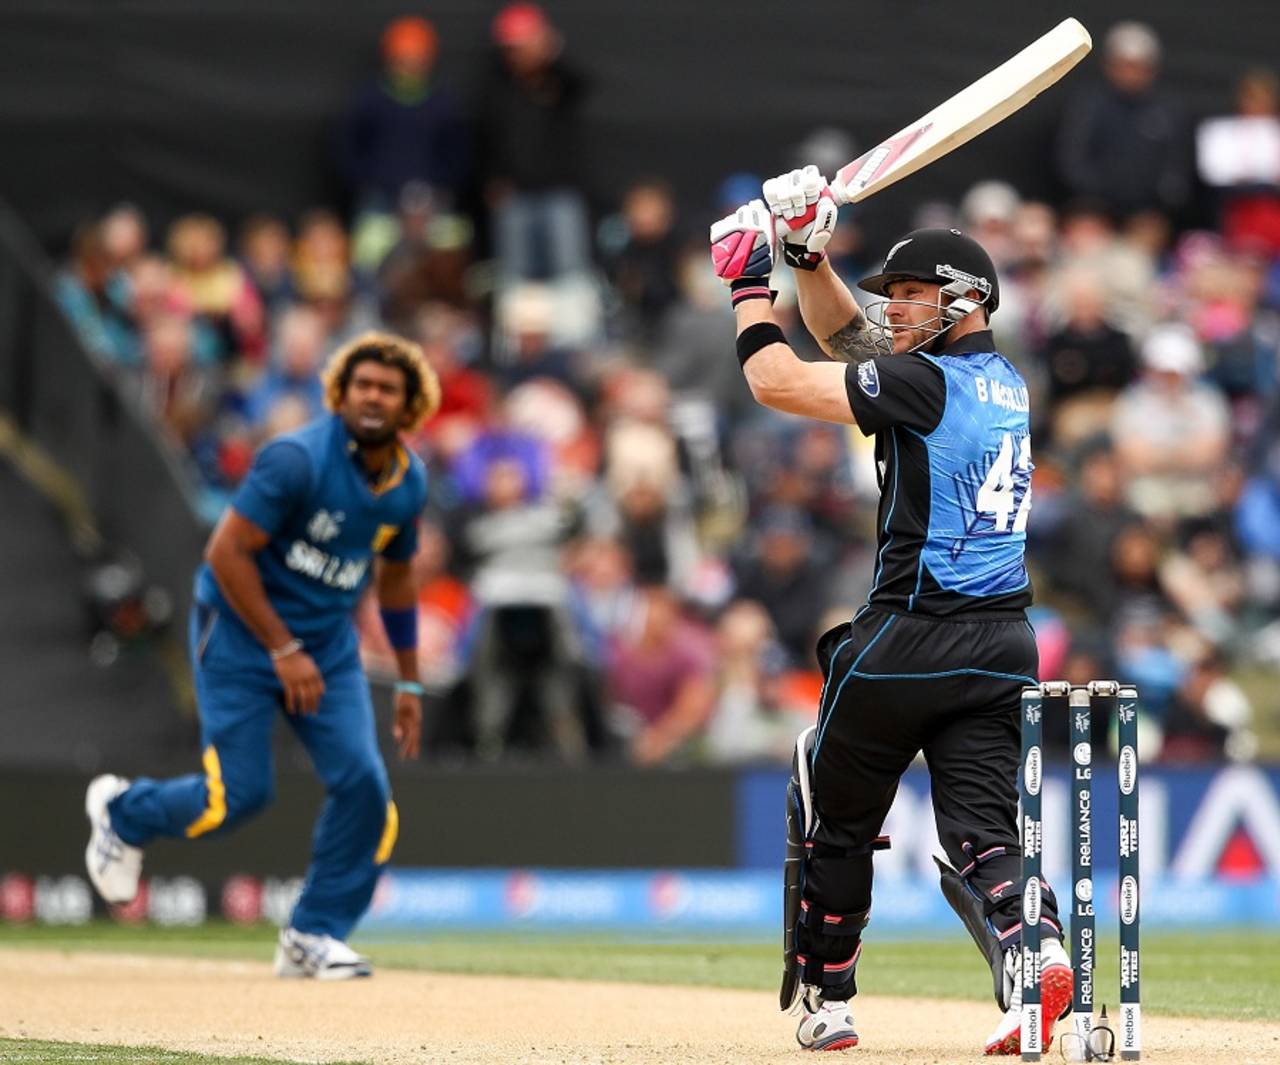 Brendon McCullum flicks on his way to 65, New Zealand v Sri Lanka, Group A, World Cup 2015, Christchurch, February 14, 2015